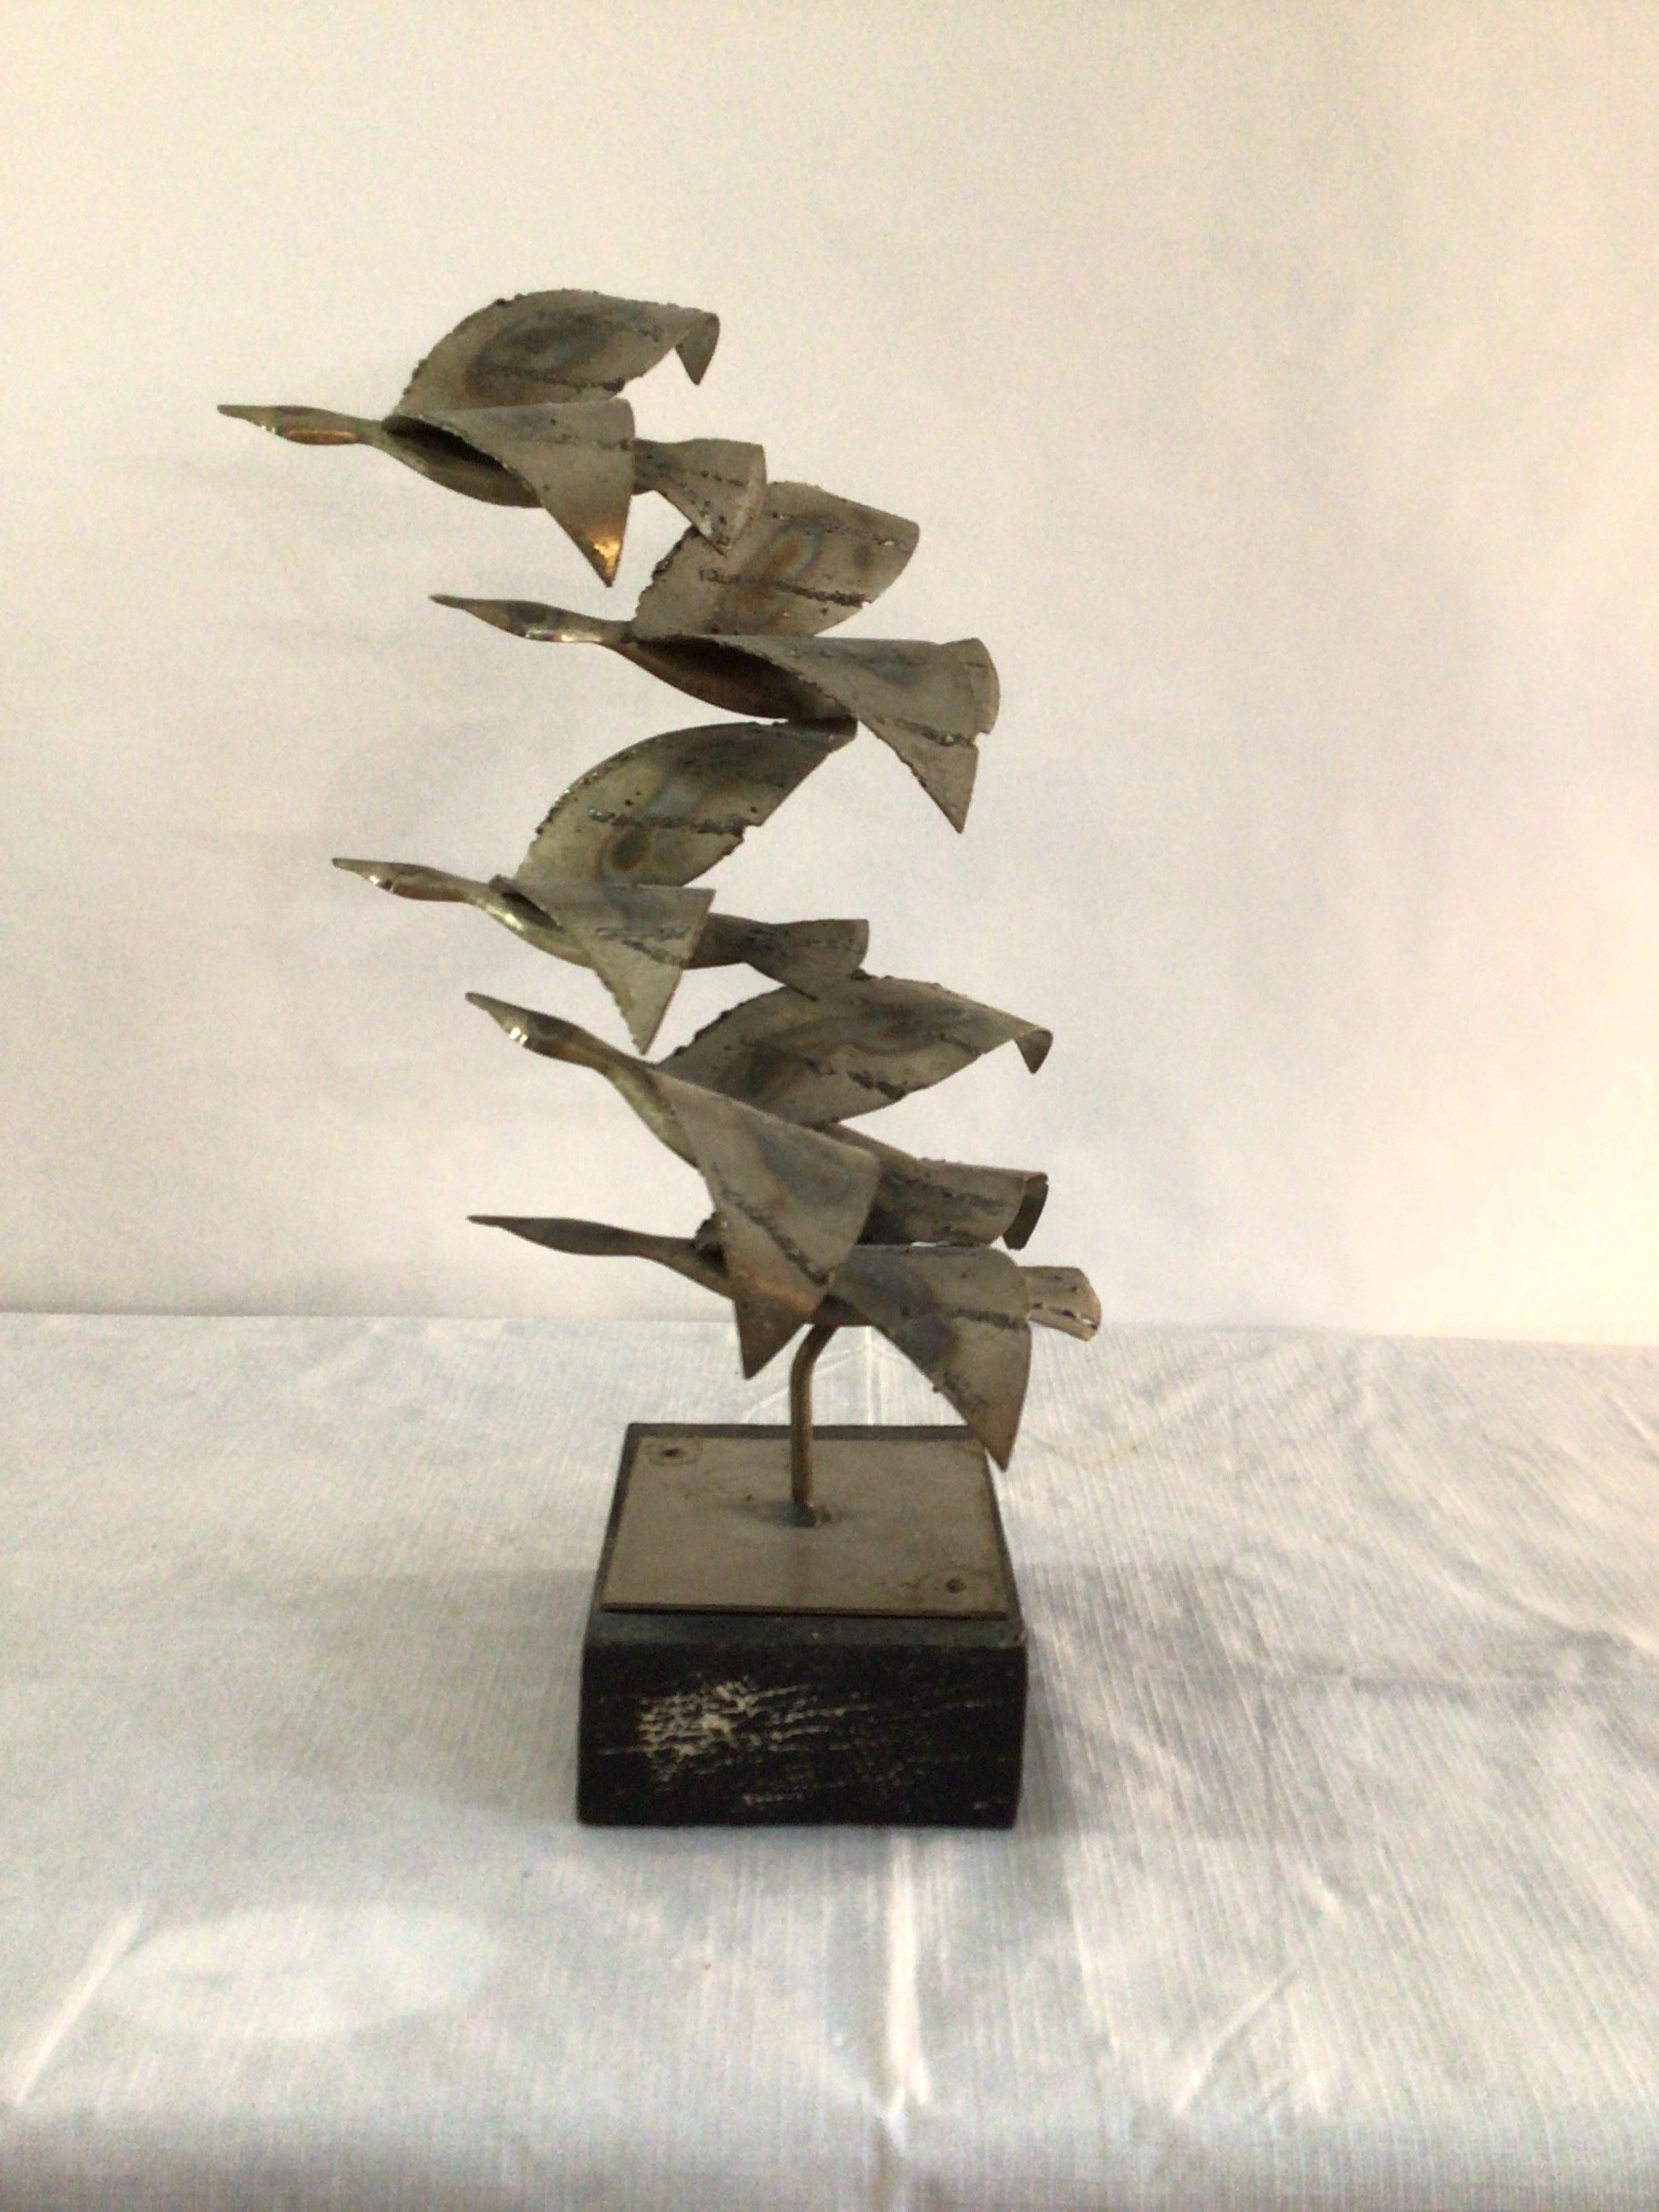 Mid-Century Modern 1970s Chrome Sculpture of Birds in Flight on Painted Wood Base For Sale